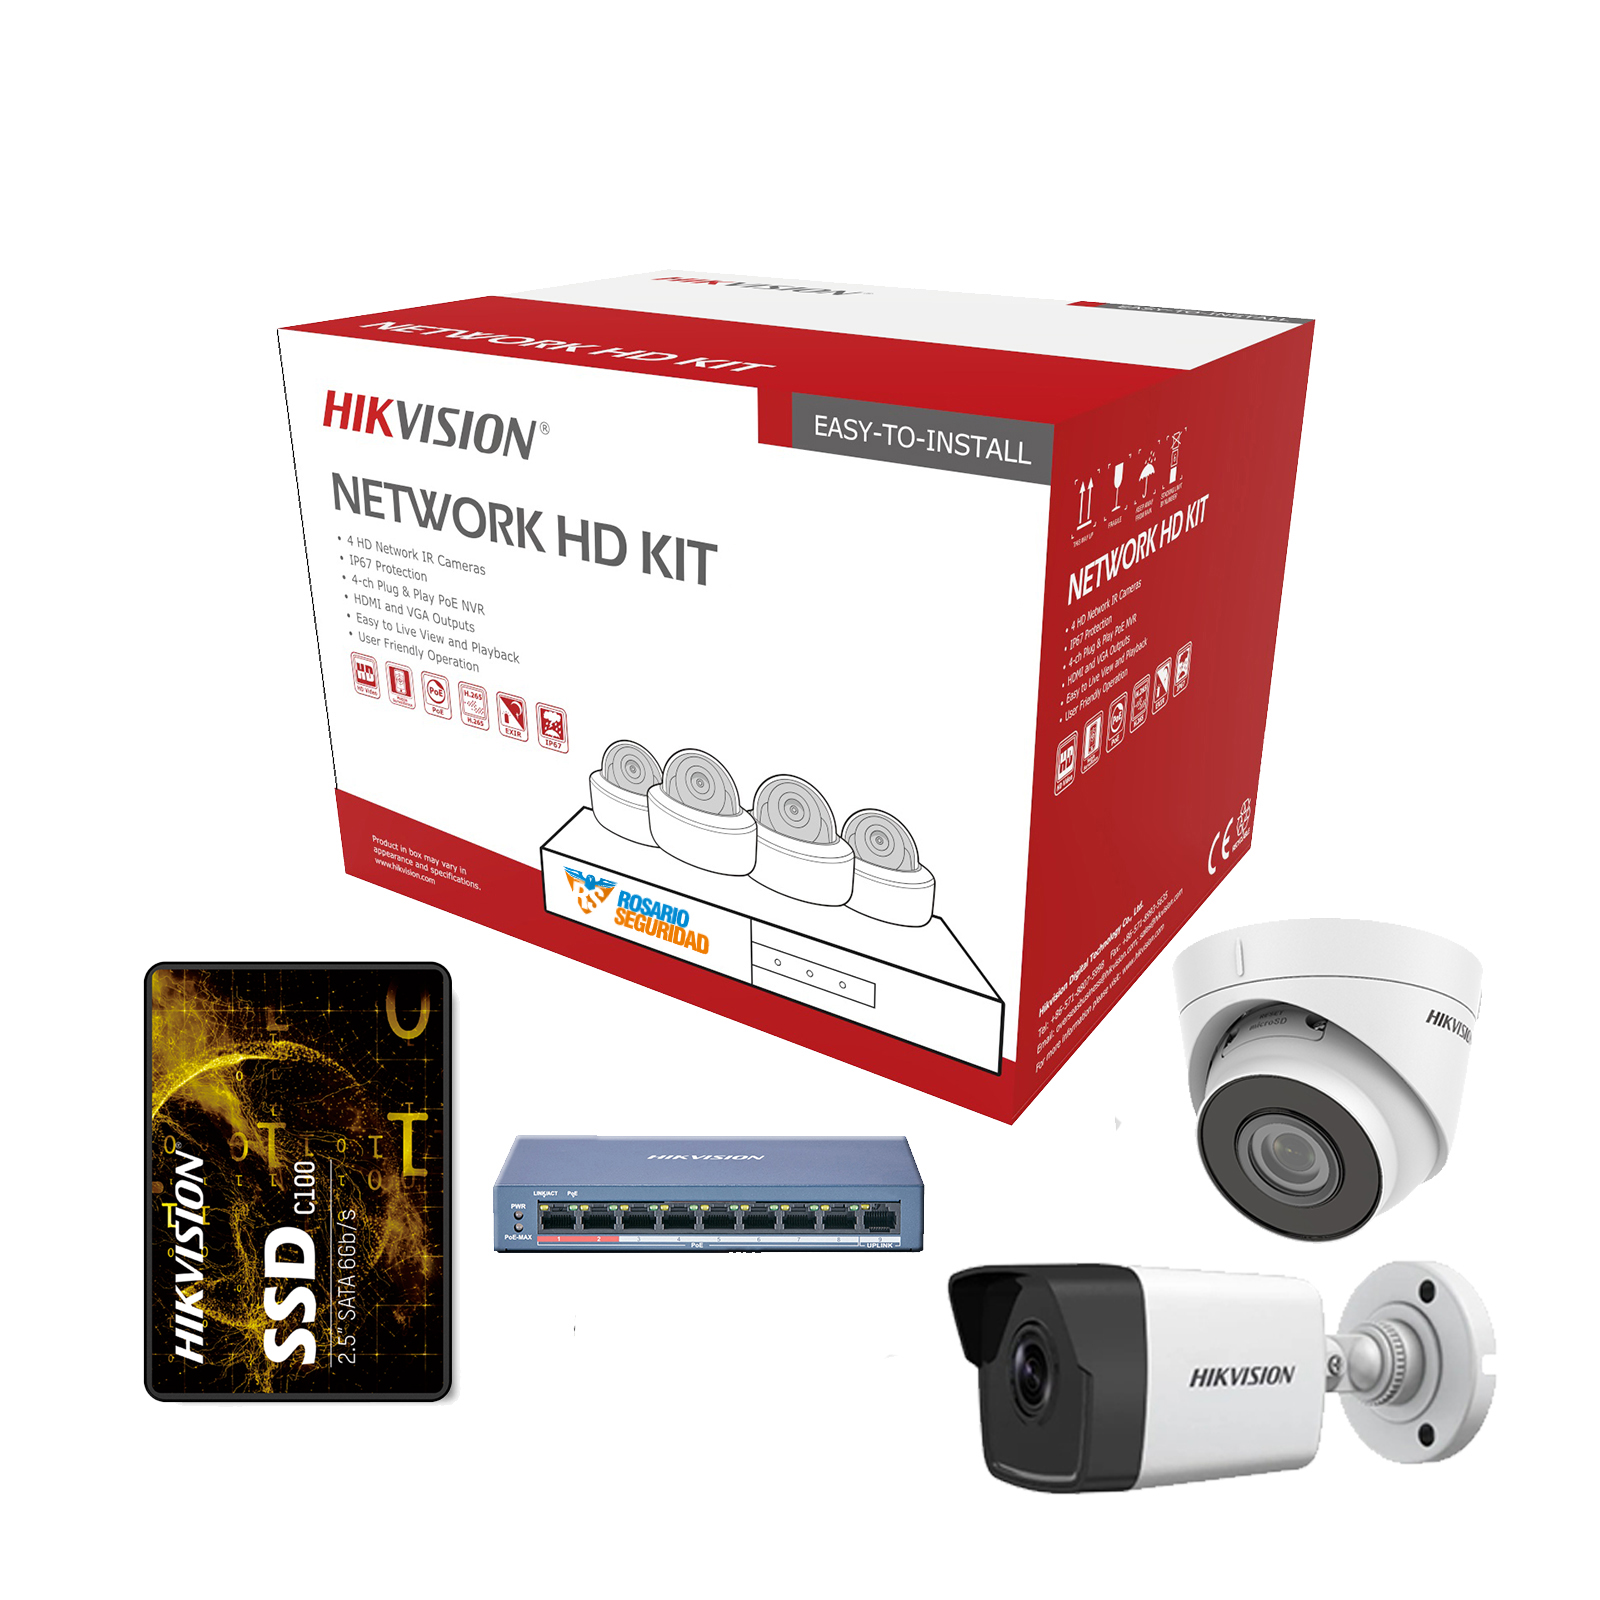 PACK HIKVISION NVR 4 CH + 2 CAMARAS IP (2MPX) Hikvision